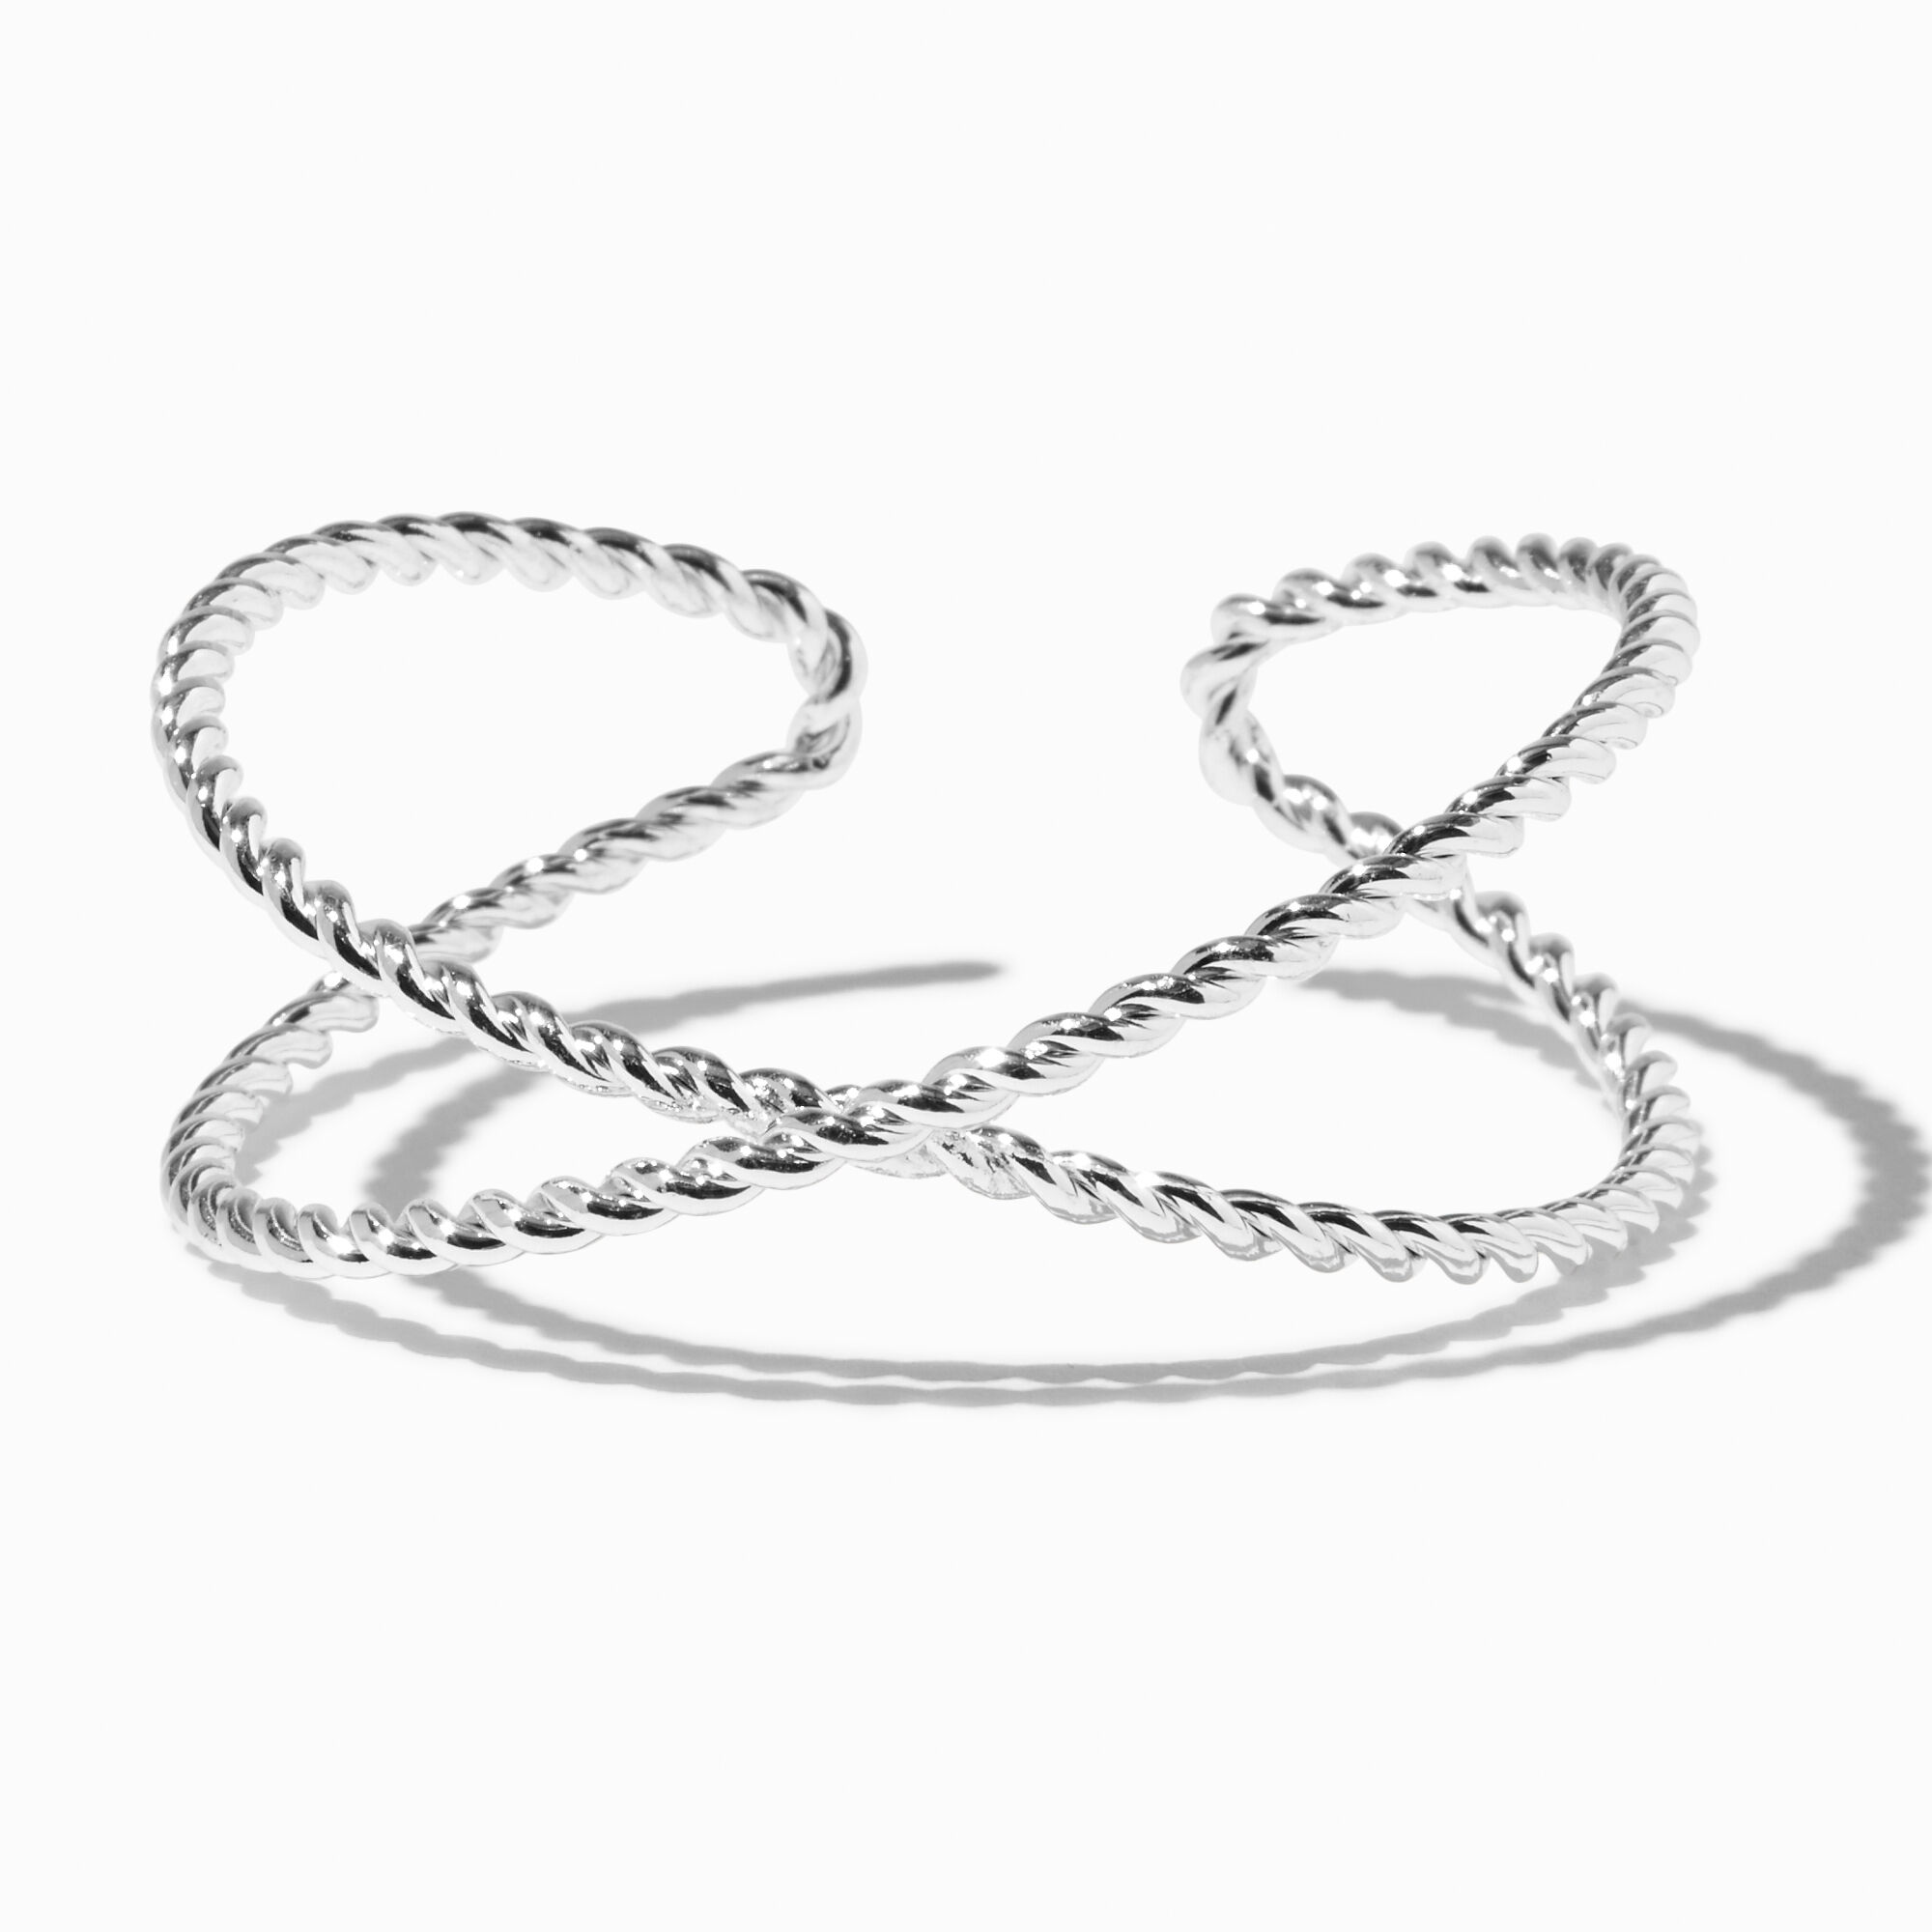 View Claires Tone Twisted Rope X Cuff Bracelet Silver information